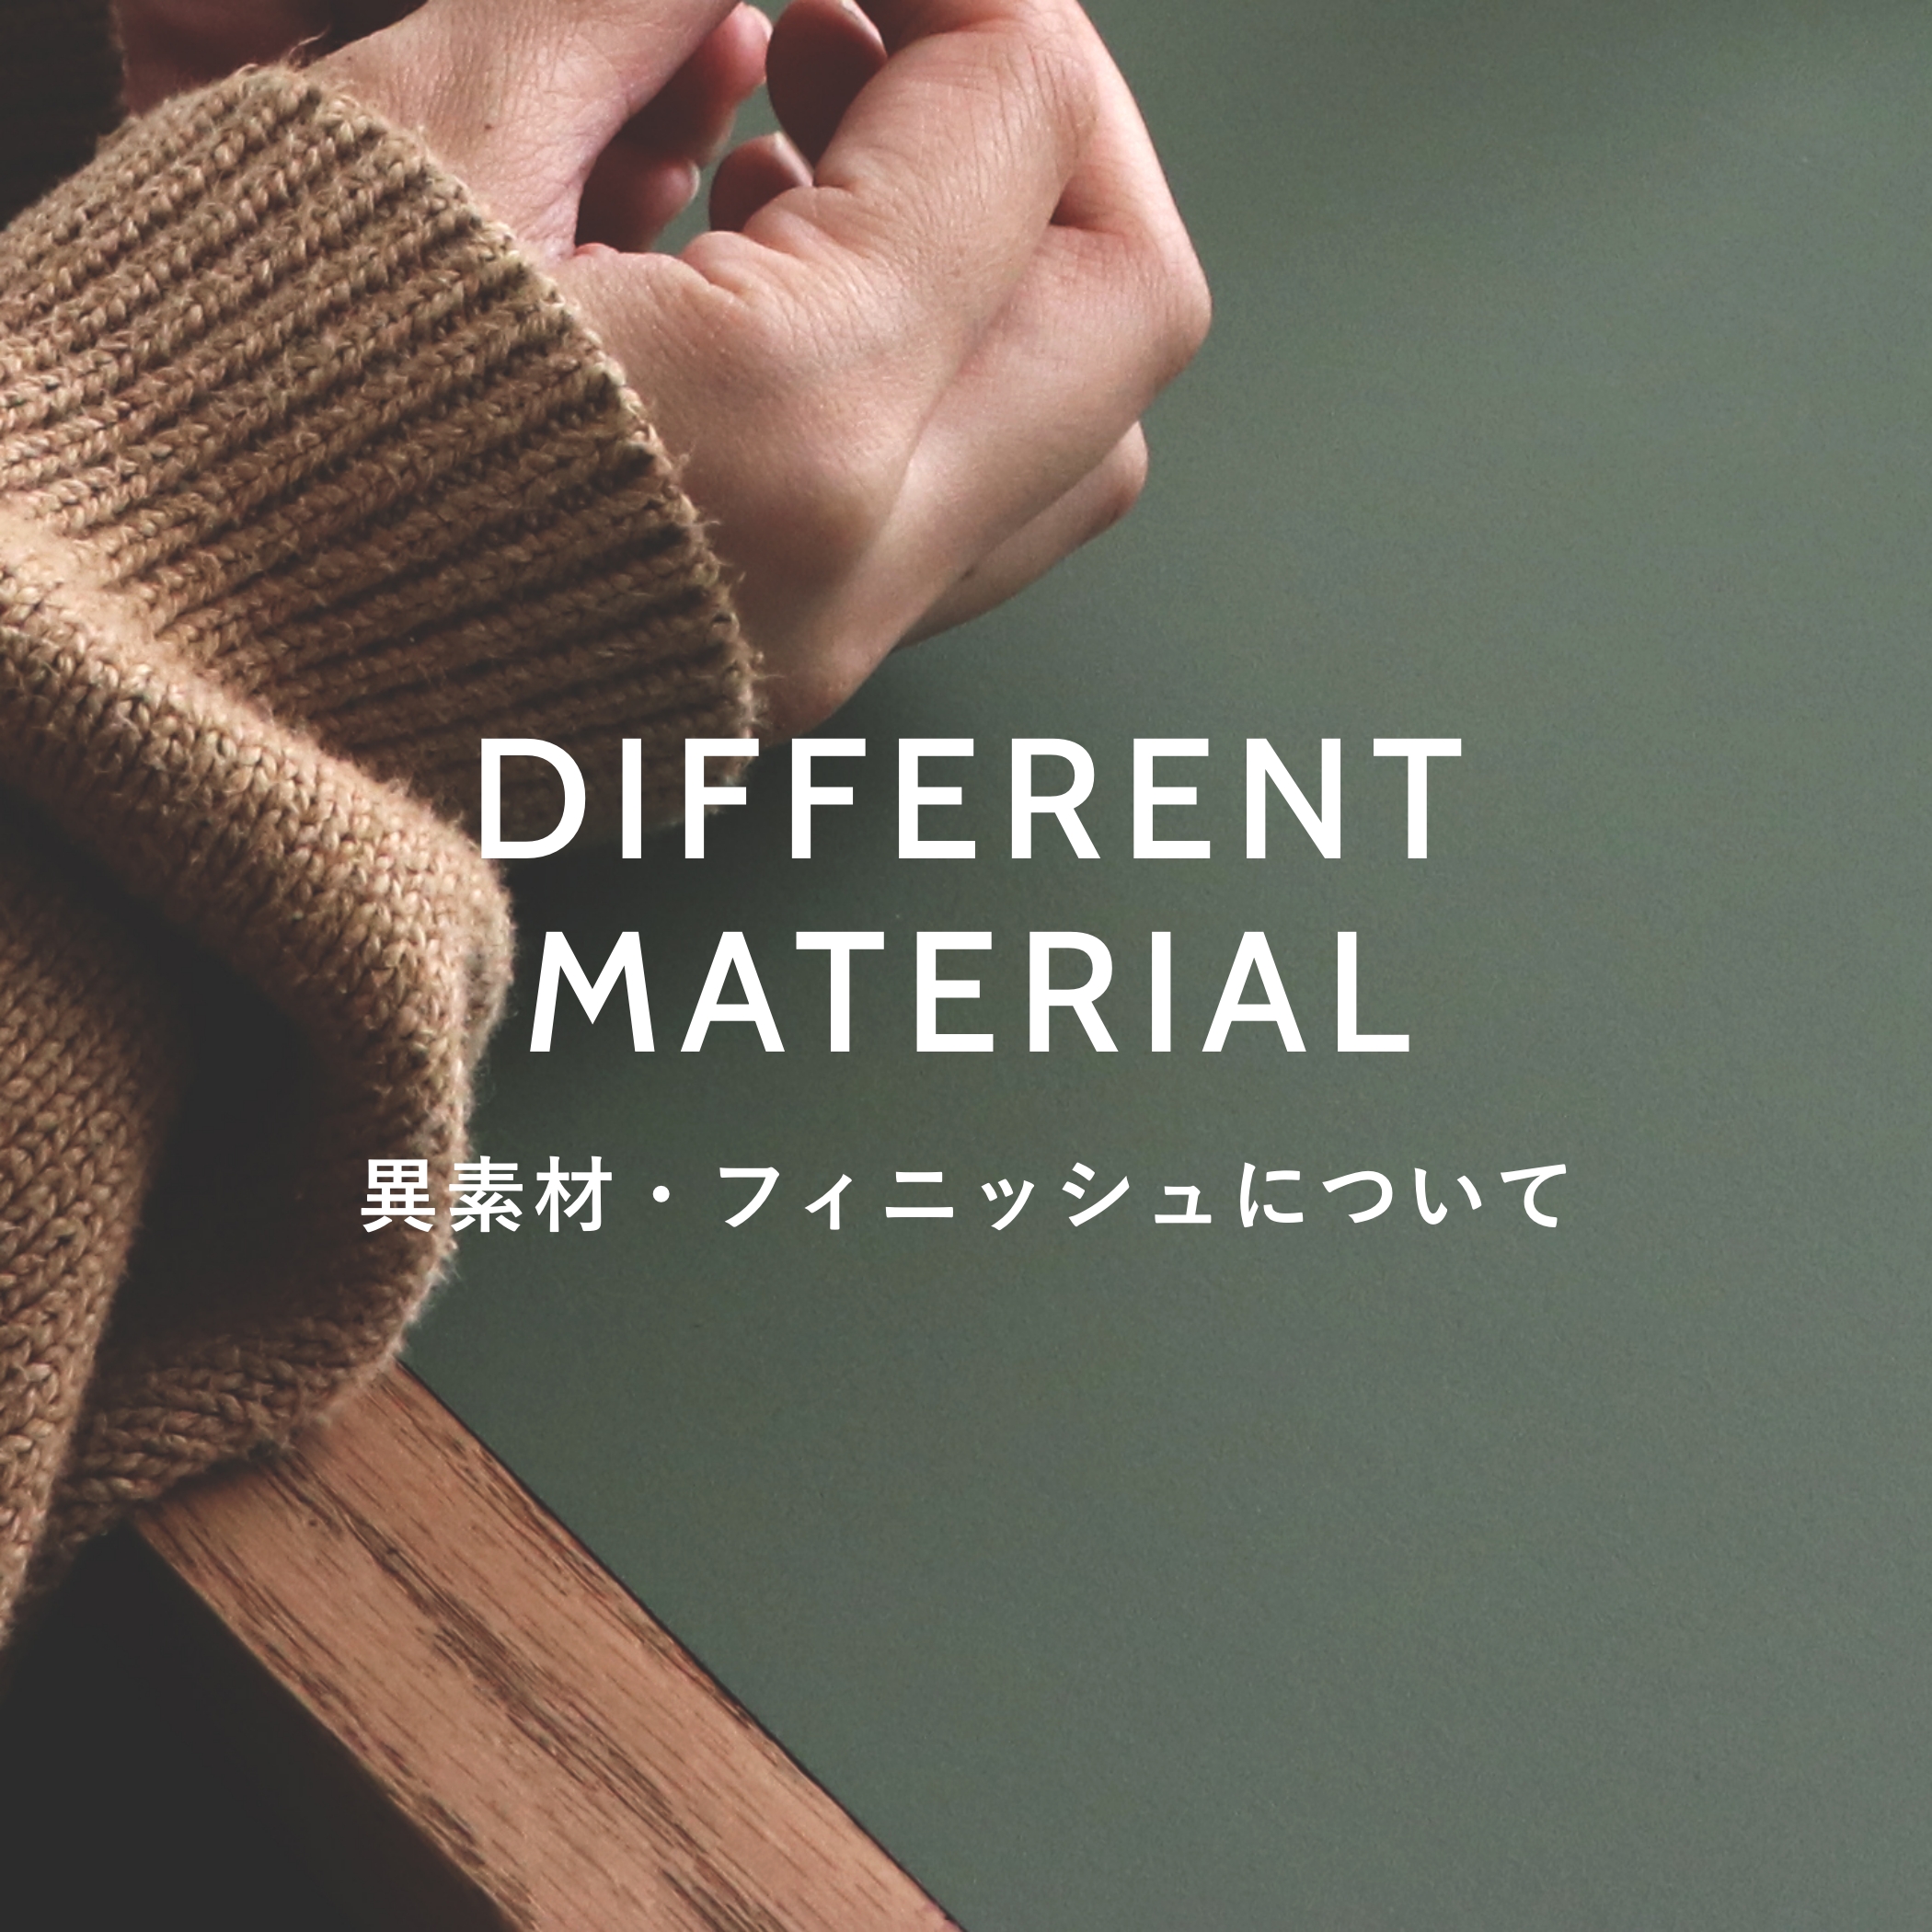 DIFFERENT MATERIAL